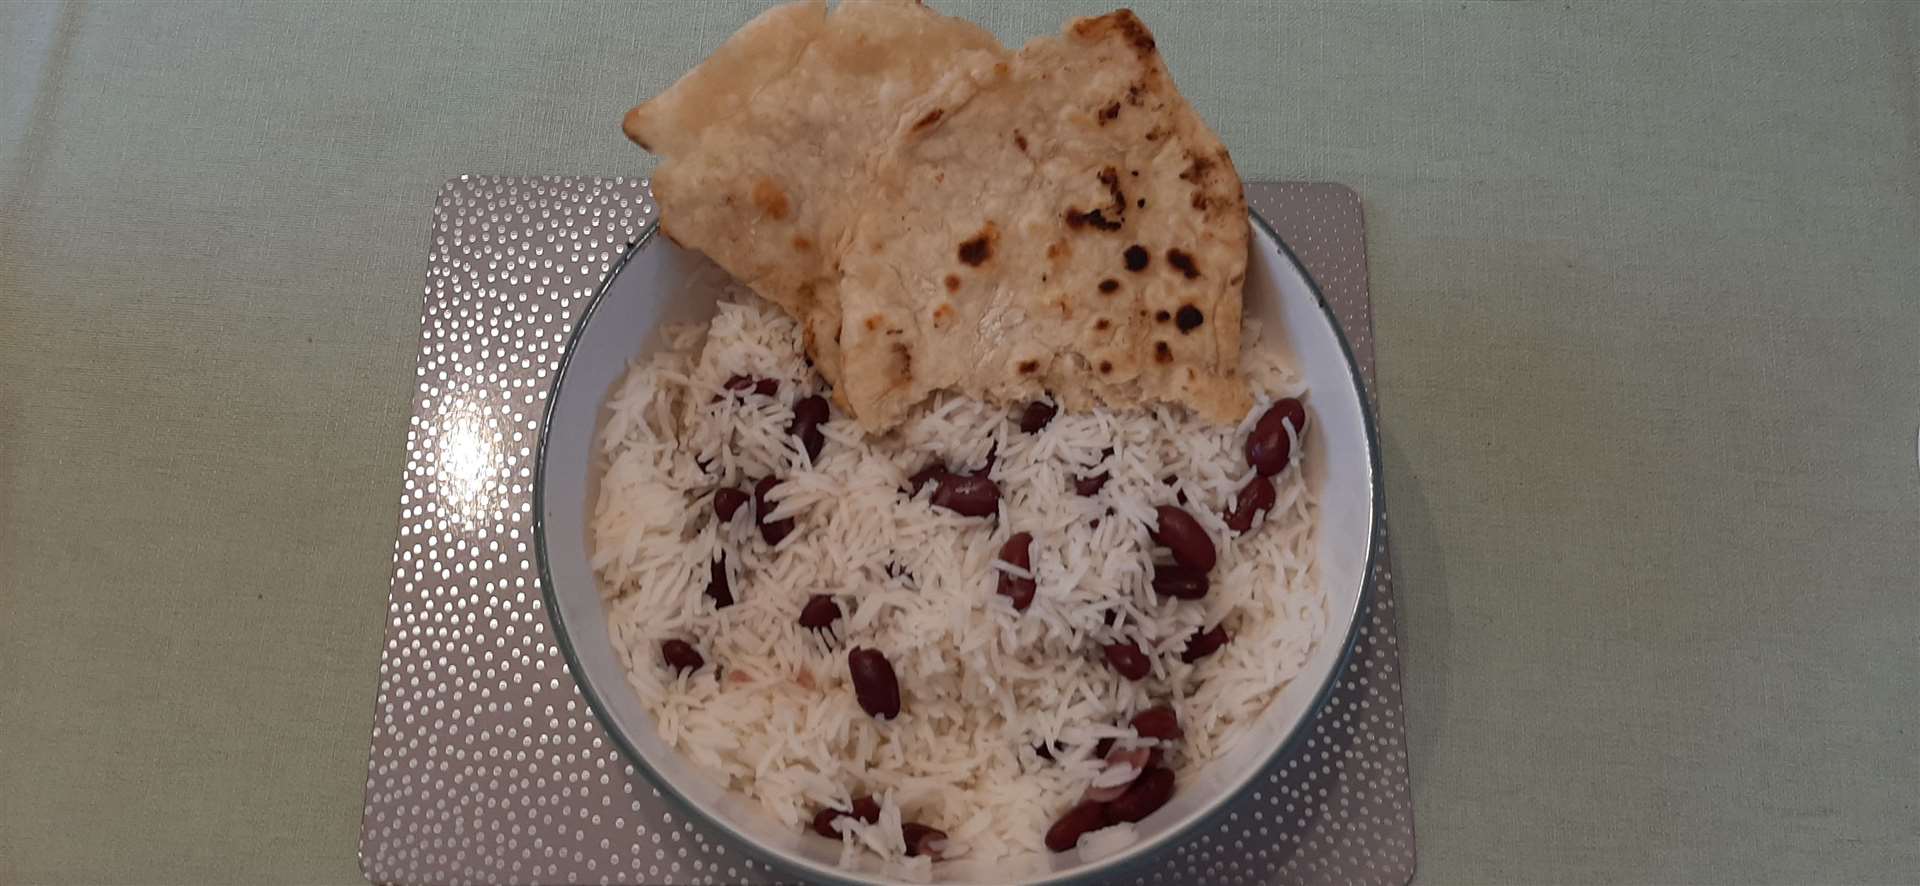 My first meal, rice and kidney beans with flatbread